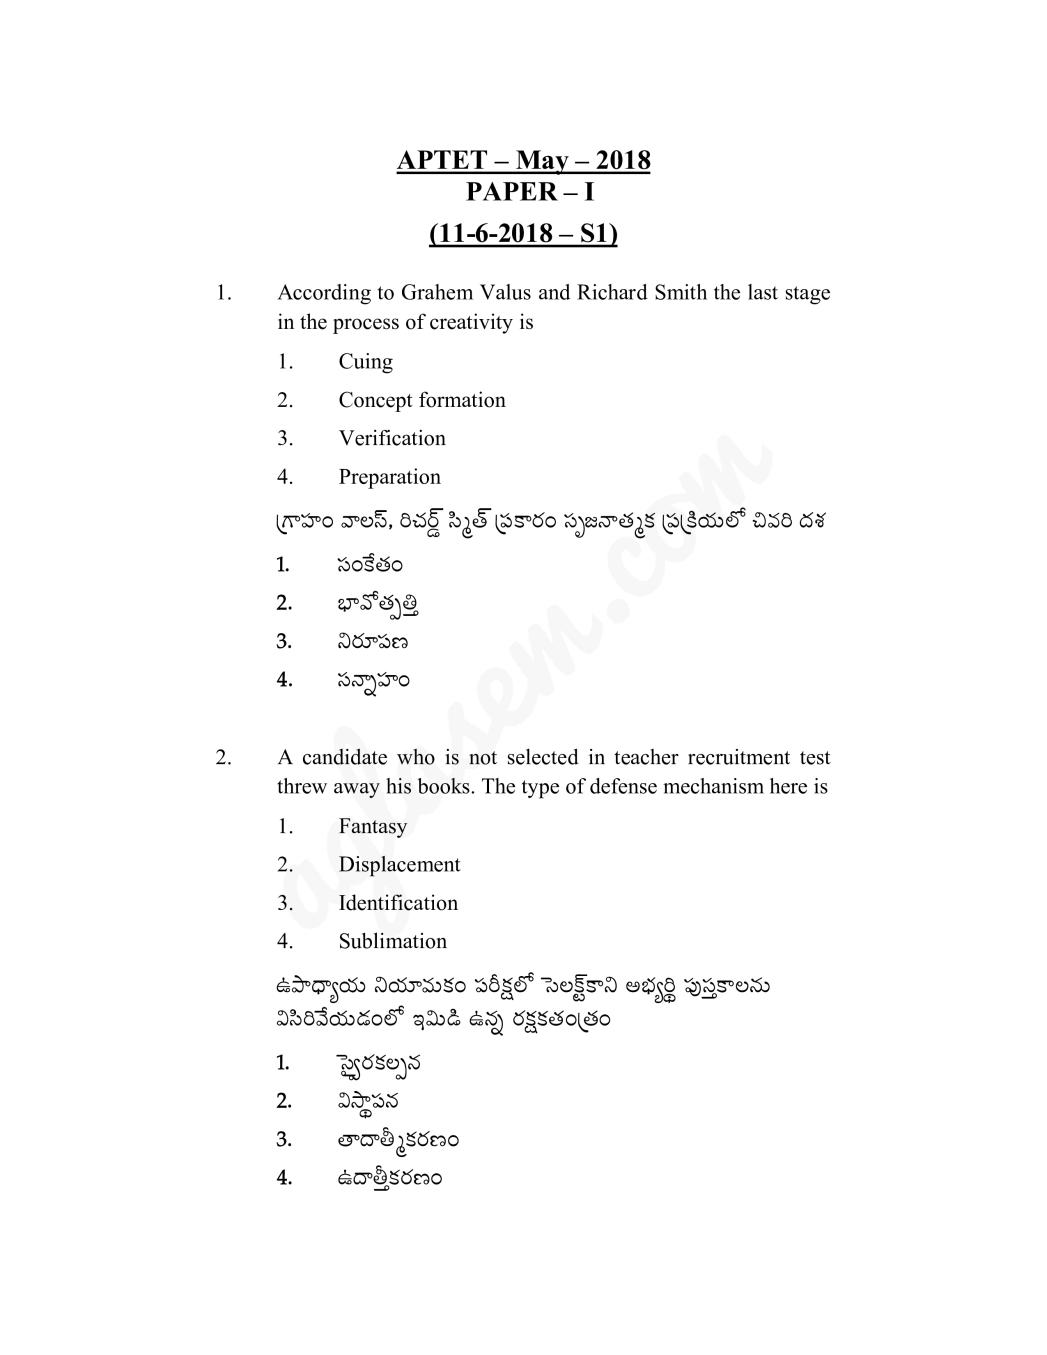 APTET Question Paper with Answers 11 Jun 2018 Paper 1 (Shift 1) - Page 1